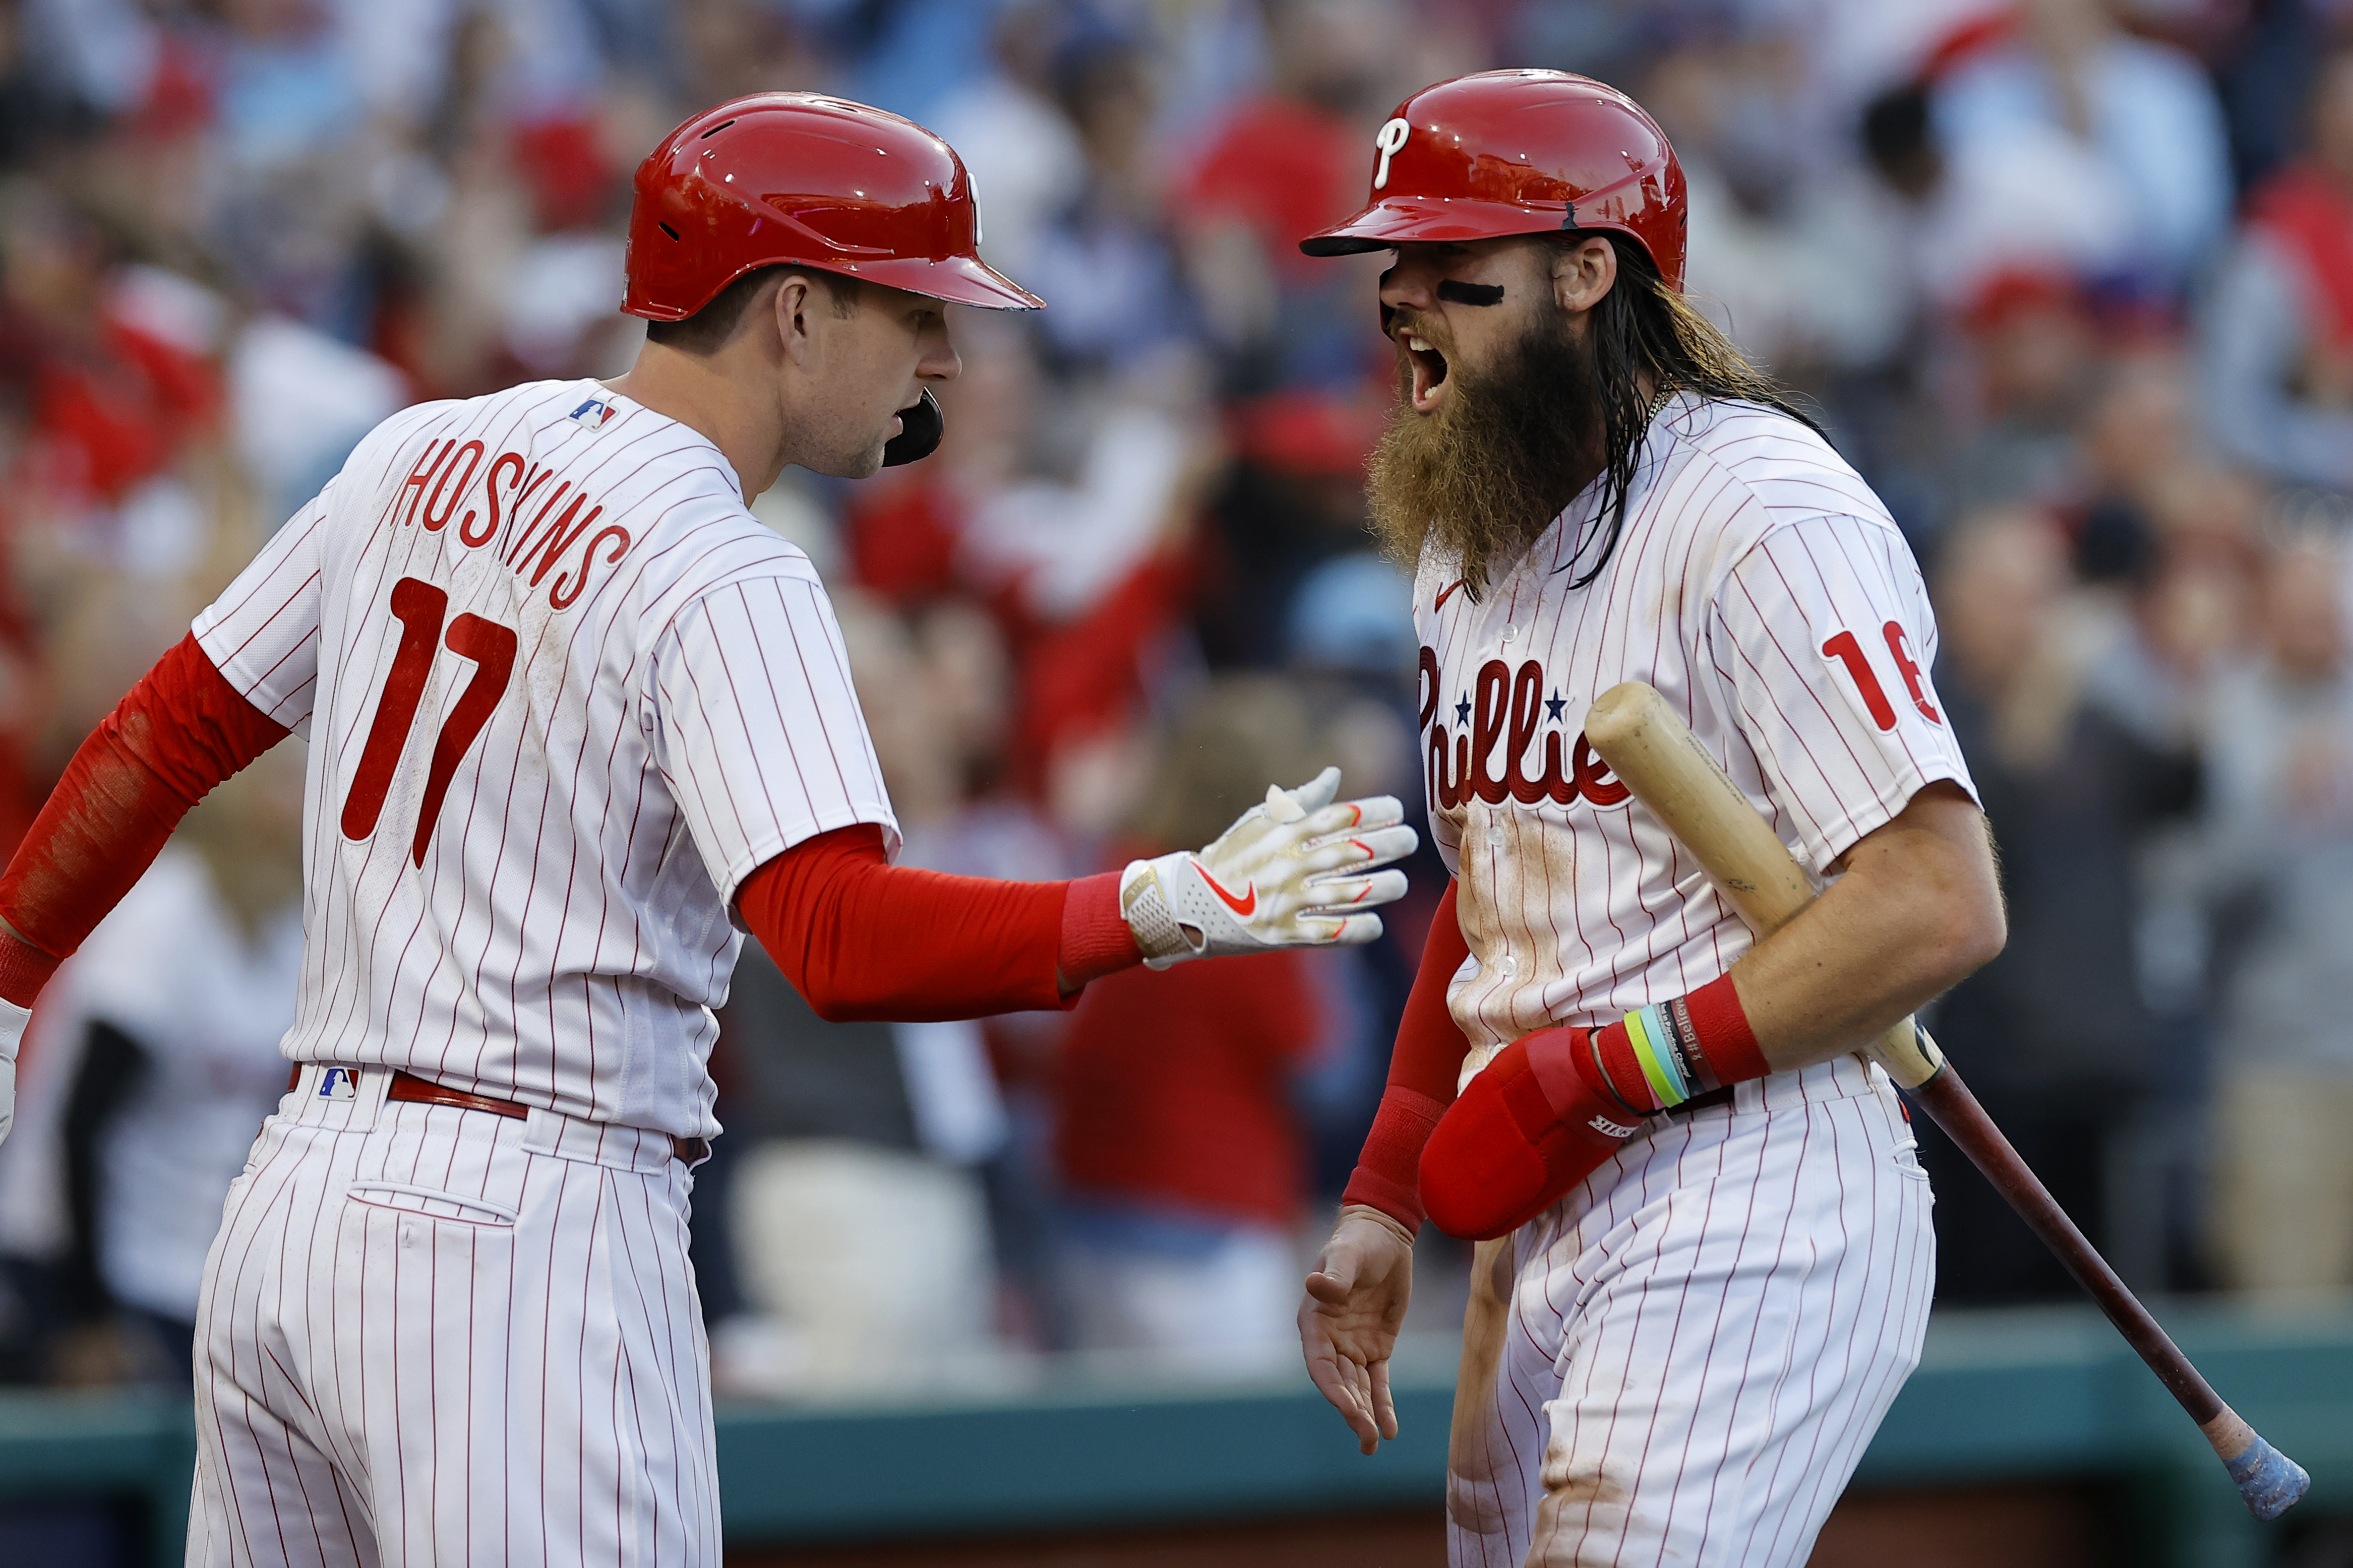 Reasons to believe in a Game 4 clinch: Bryce Harper, home cooking